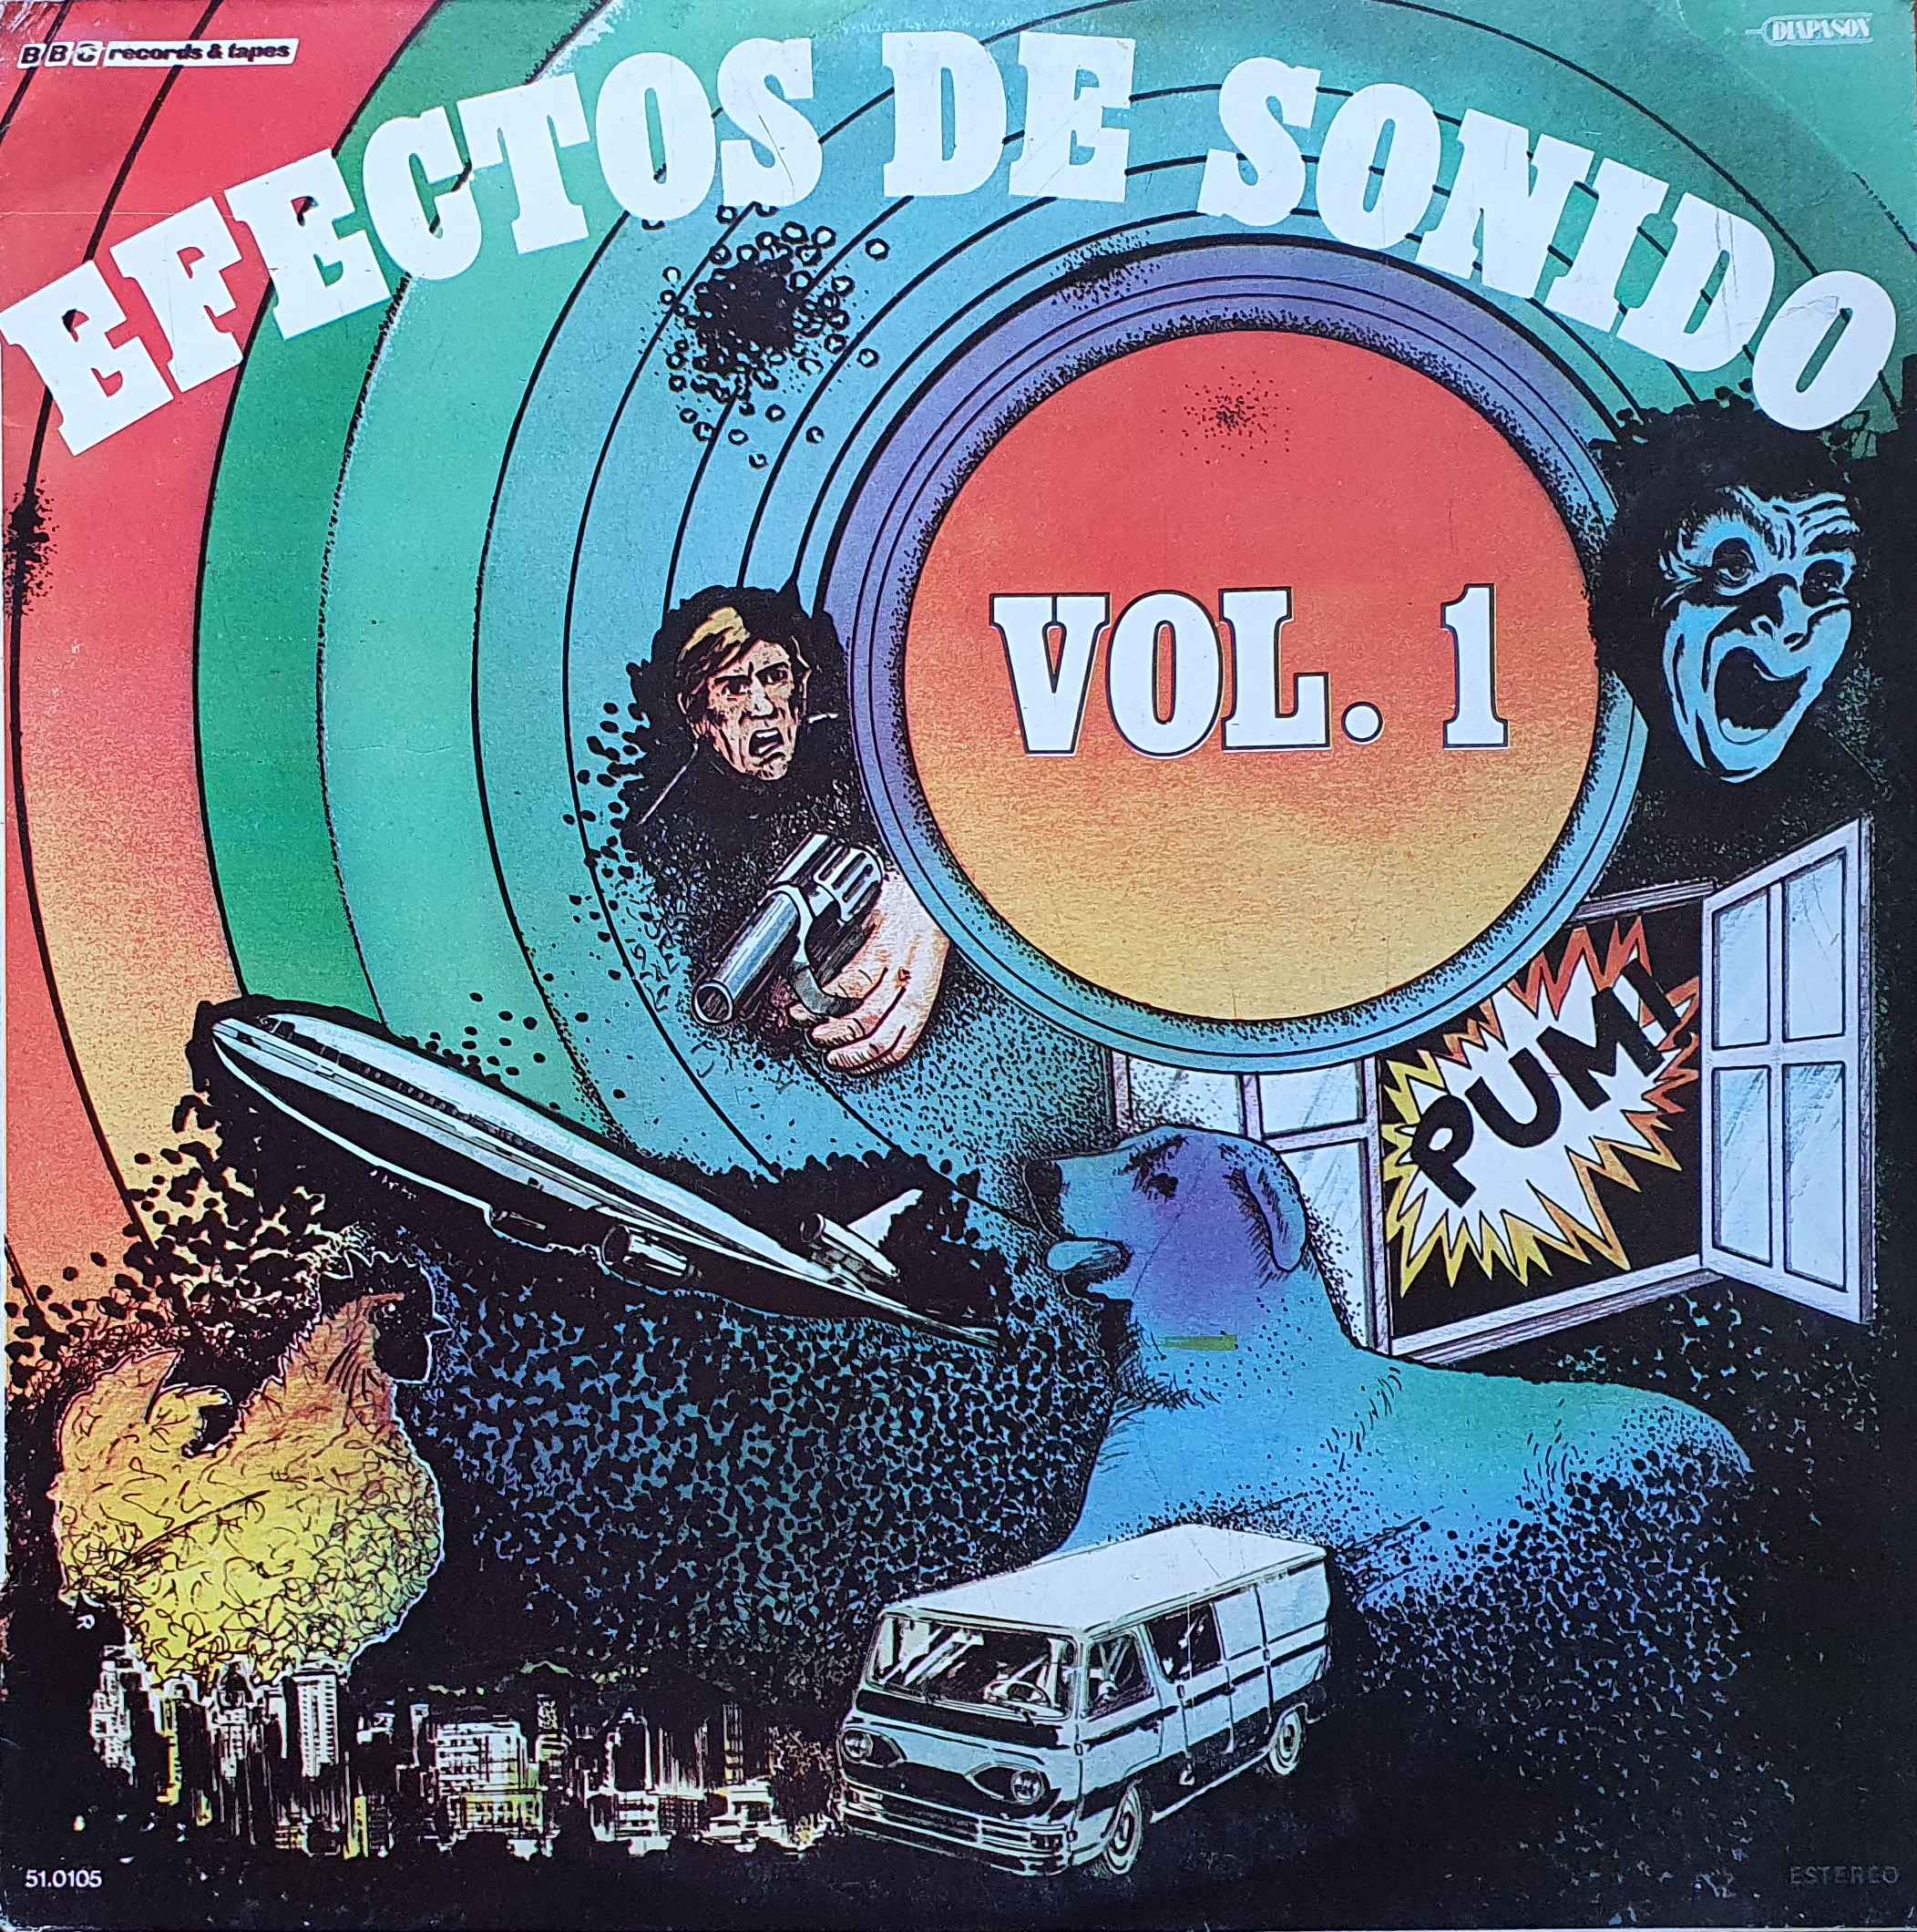 Picture of 51.0105 Efectos de sonido No 1 by artist Various from the BBC albums - Records and Tapes library